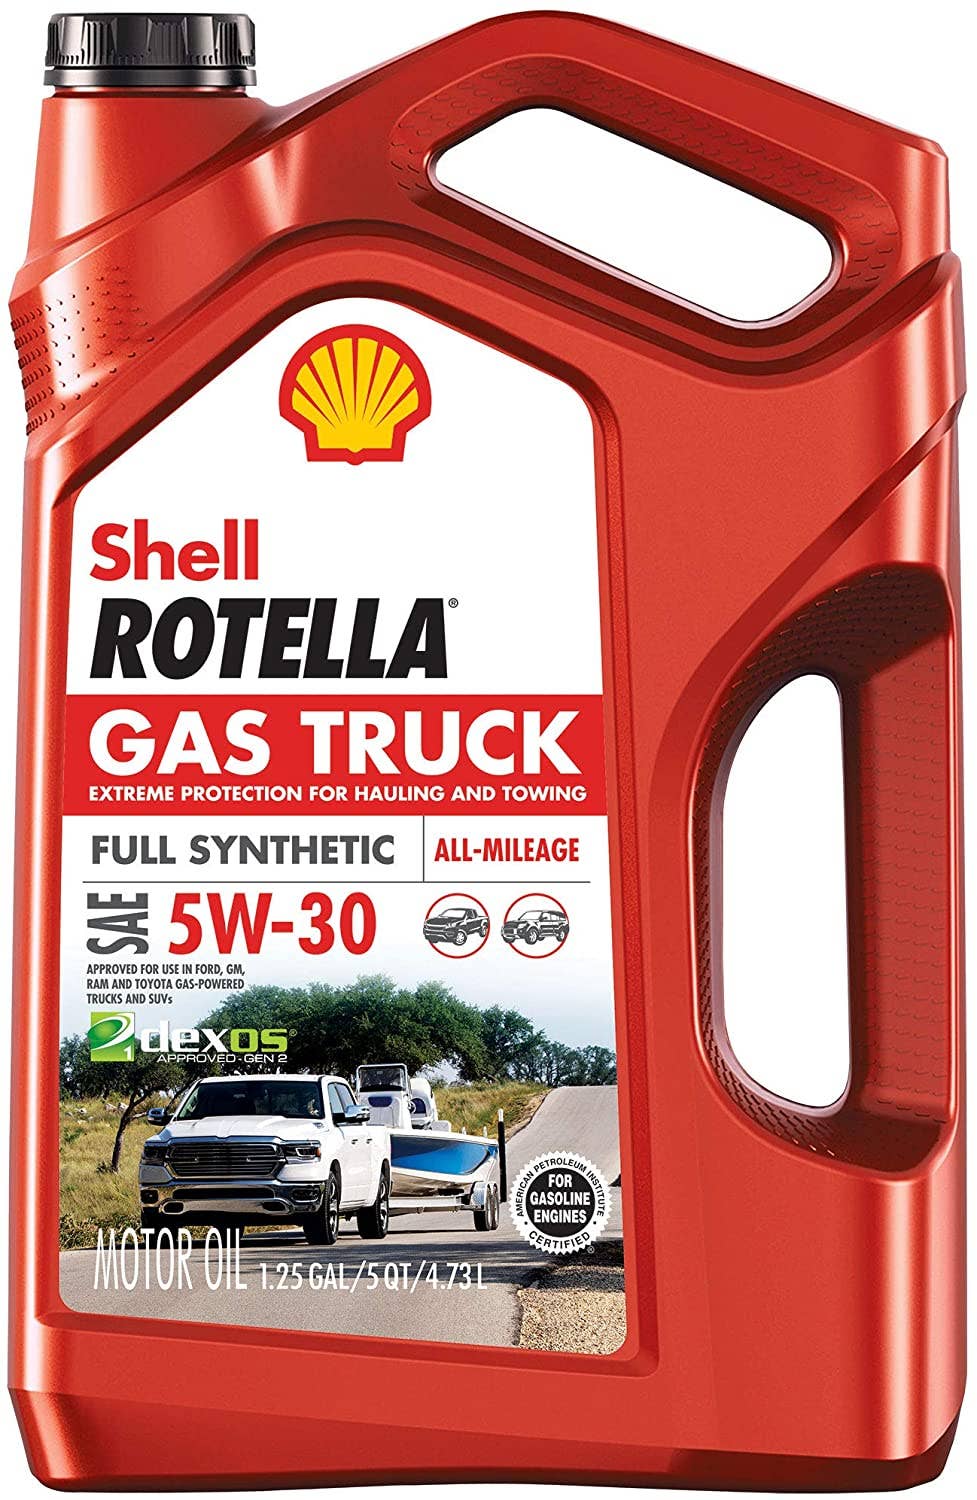 Shell Rotella Gas Truck Full Synthetic 5W-30 Motor Oil